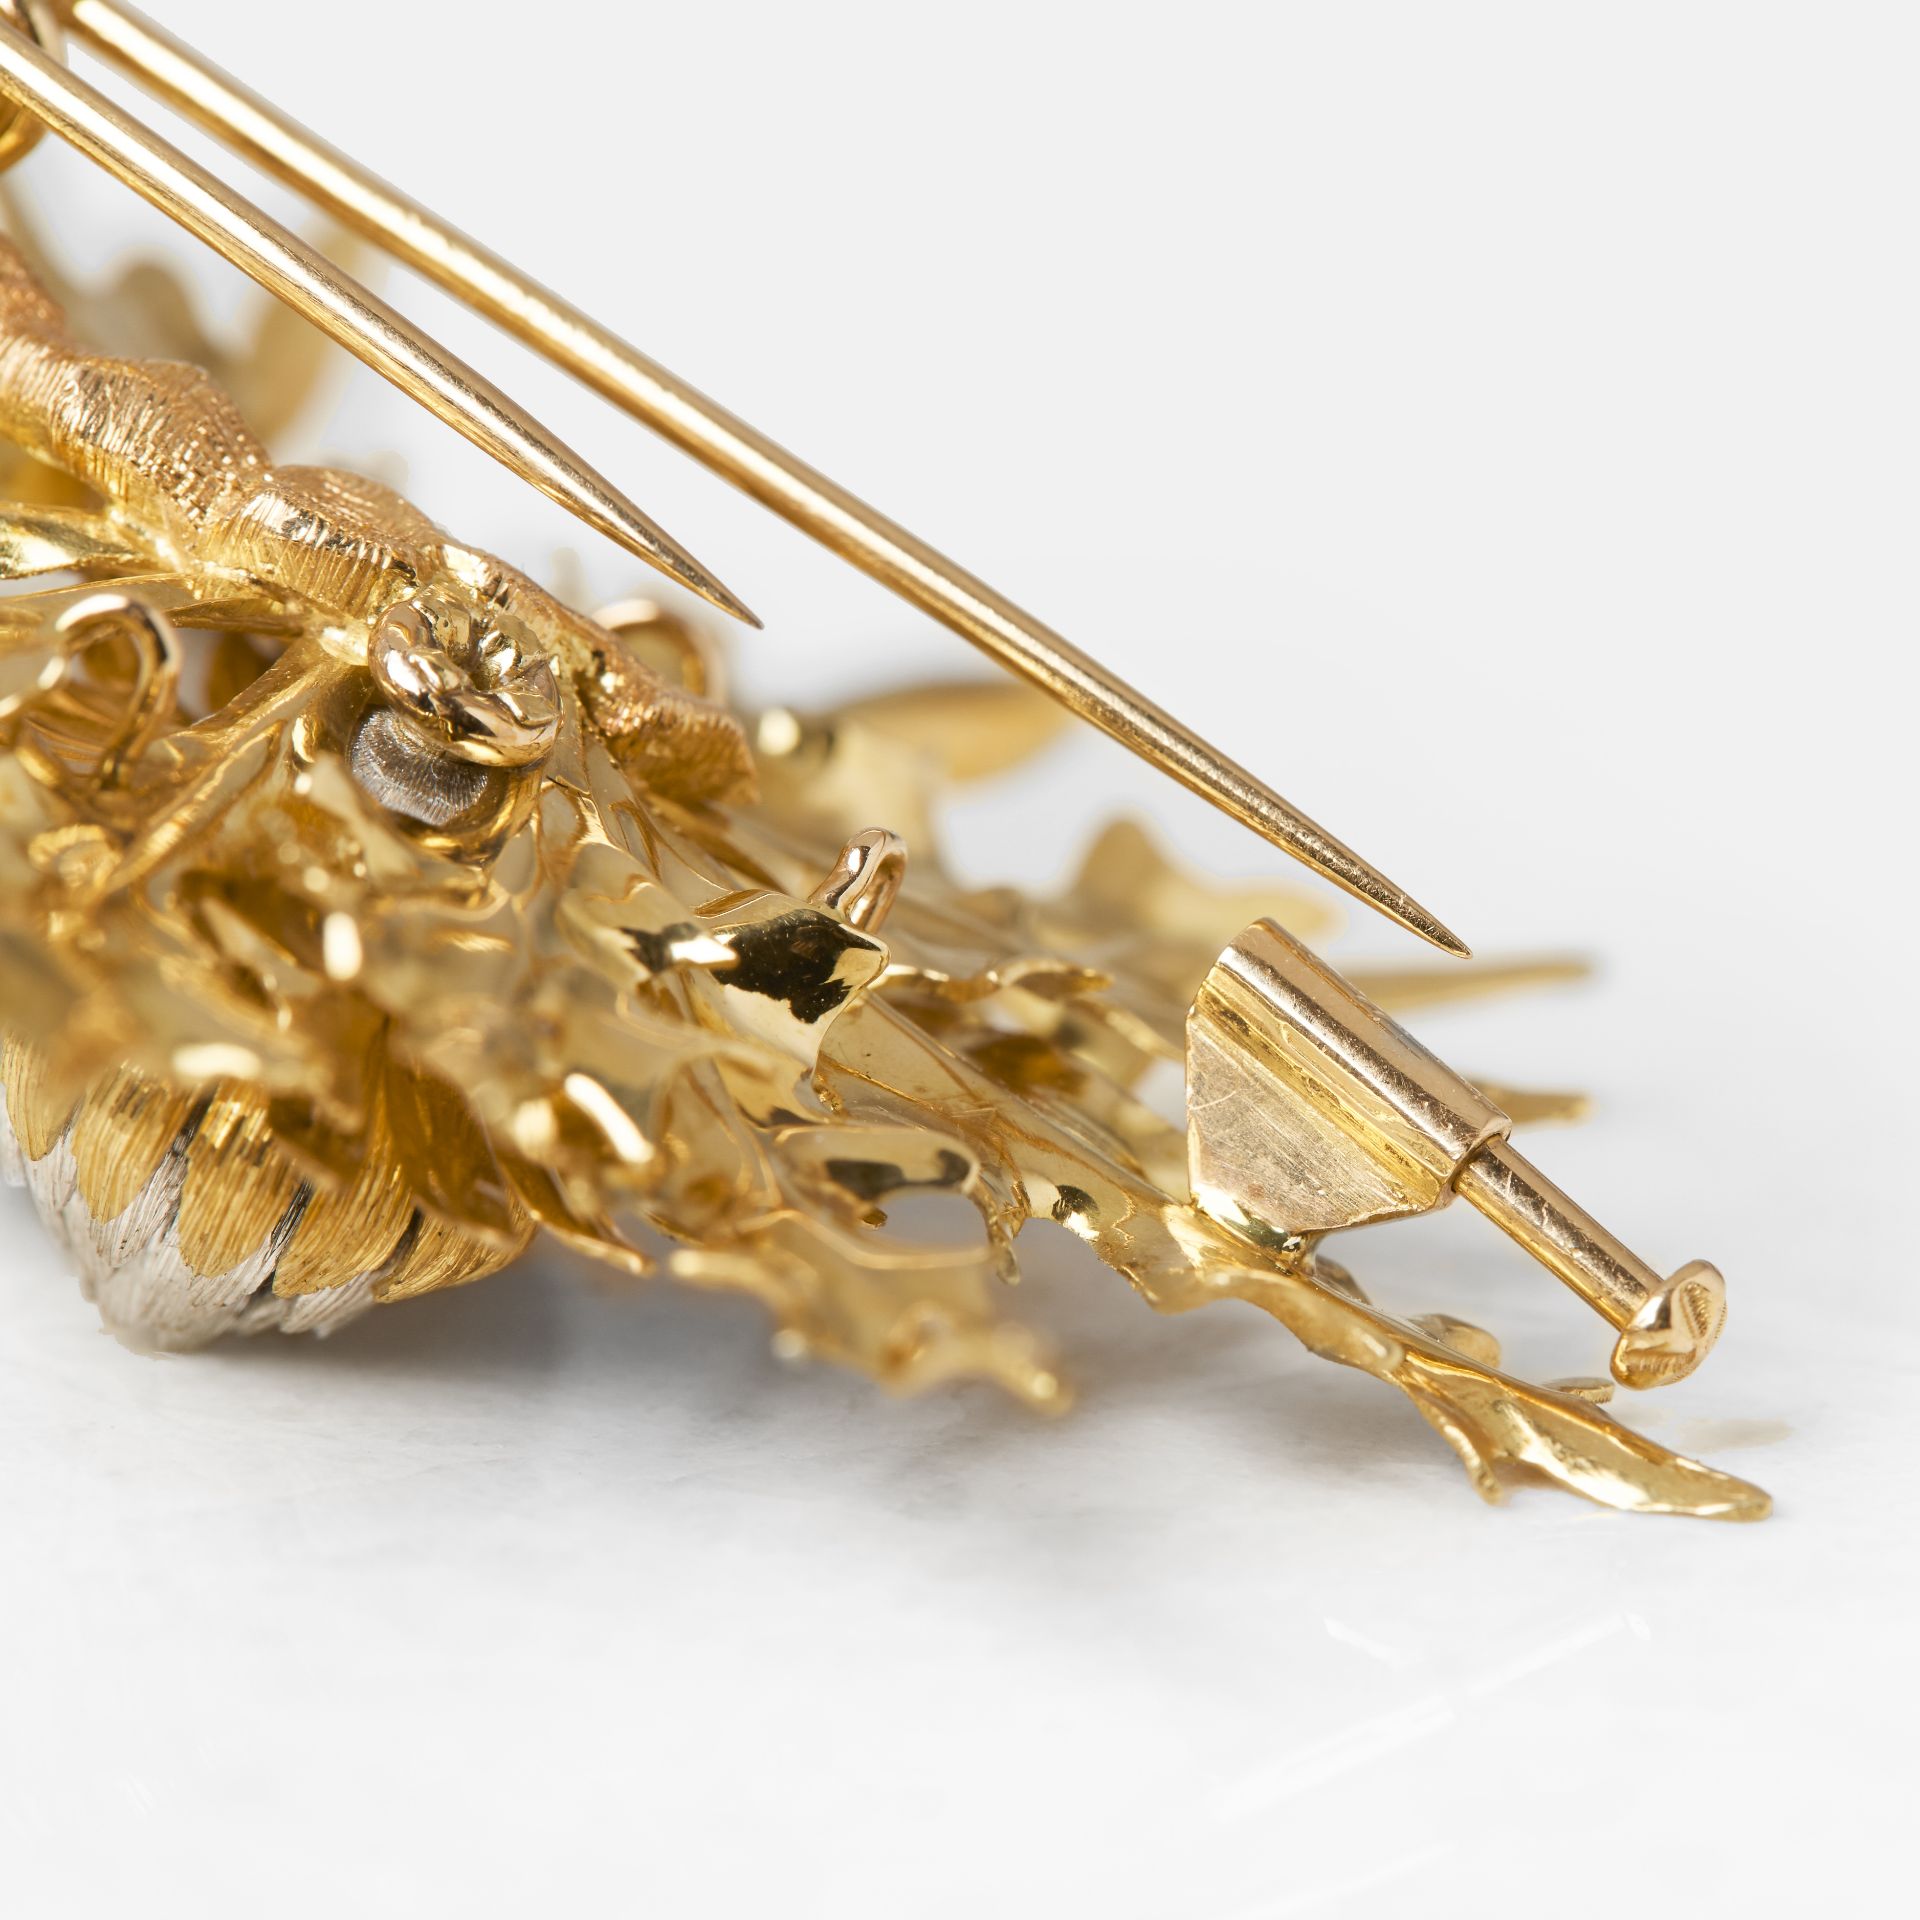 Buccellati 18k Yellow, White & Rose Gold Thistle Brooch - Image 3 of 5